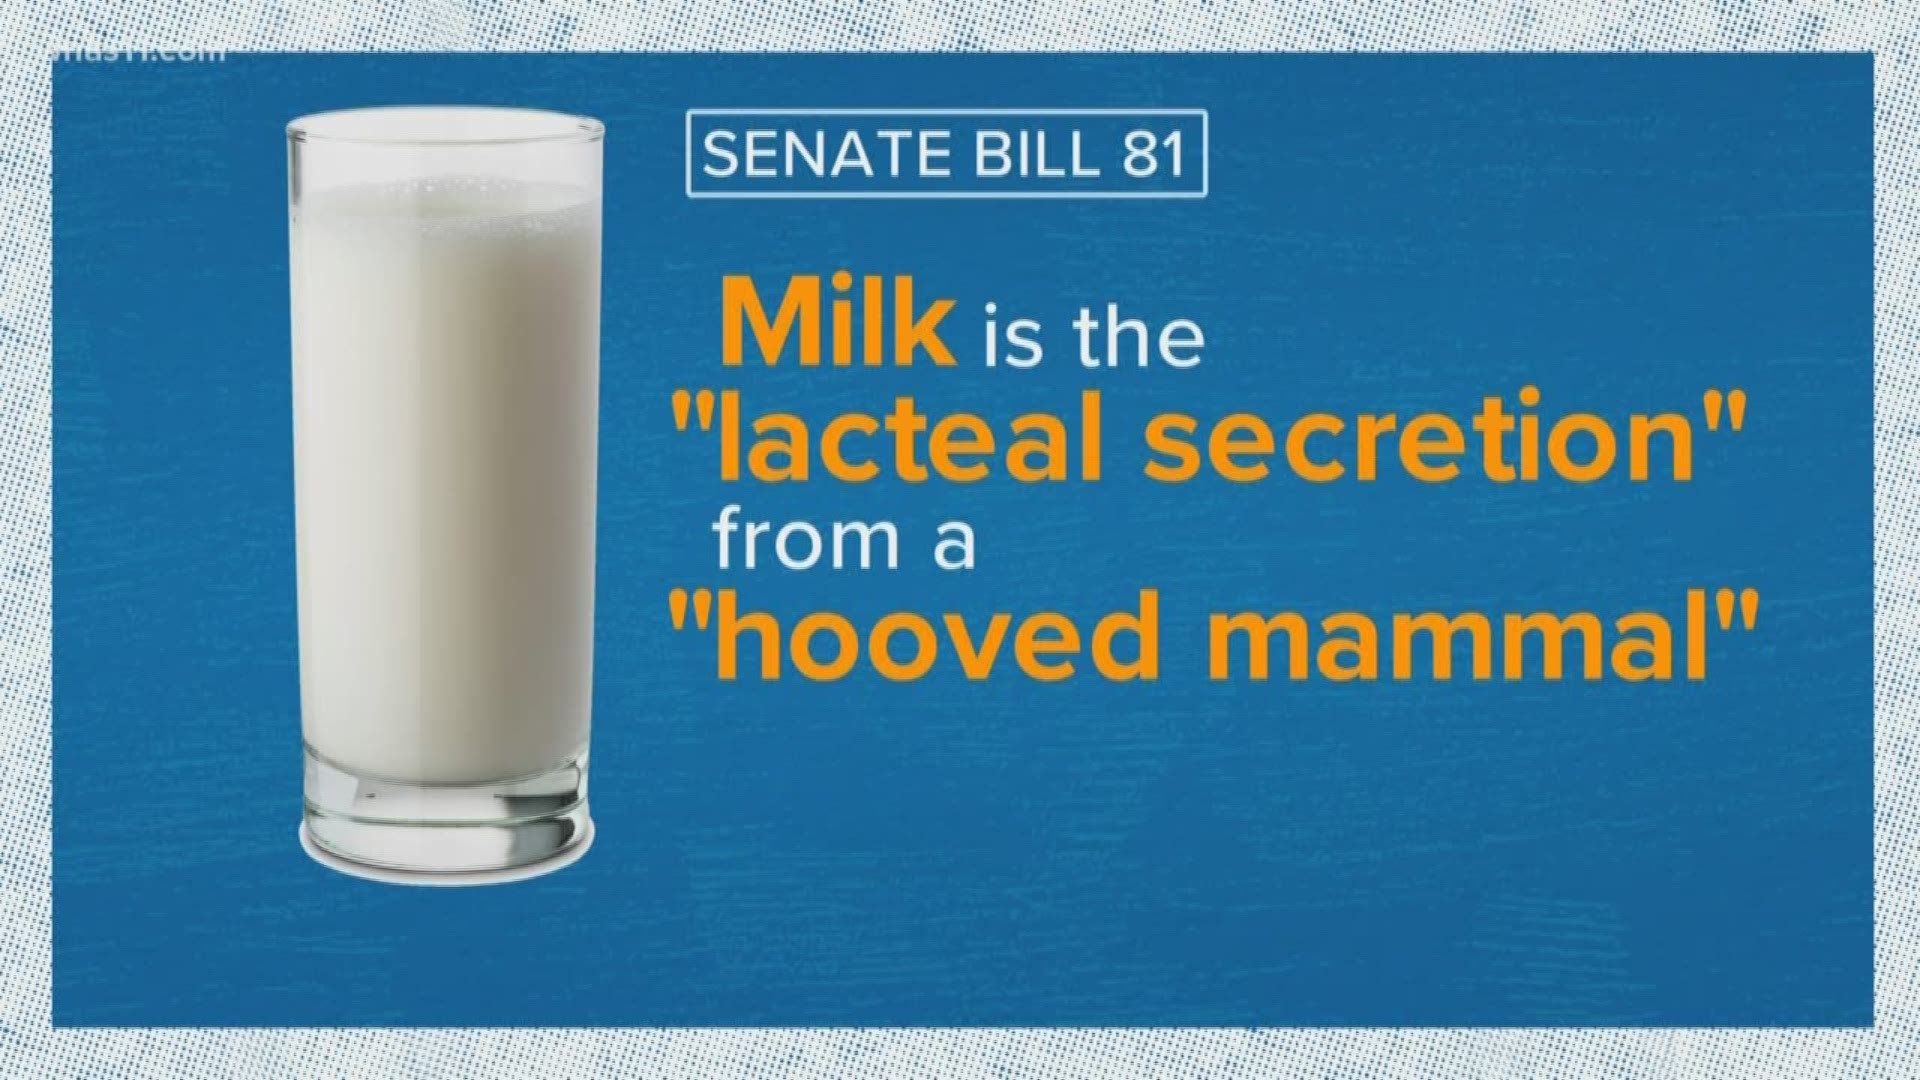 A bill being considered in the Kentucky legislature would legally define milk as the "lacteal secretion" from a "hooved mammal."